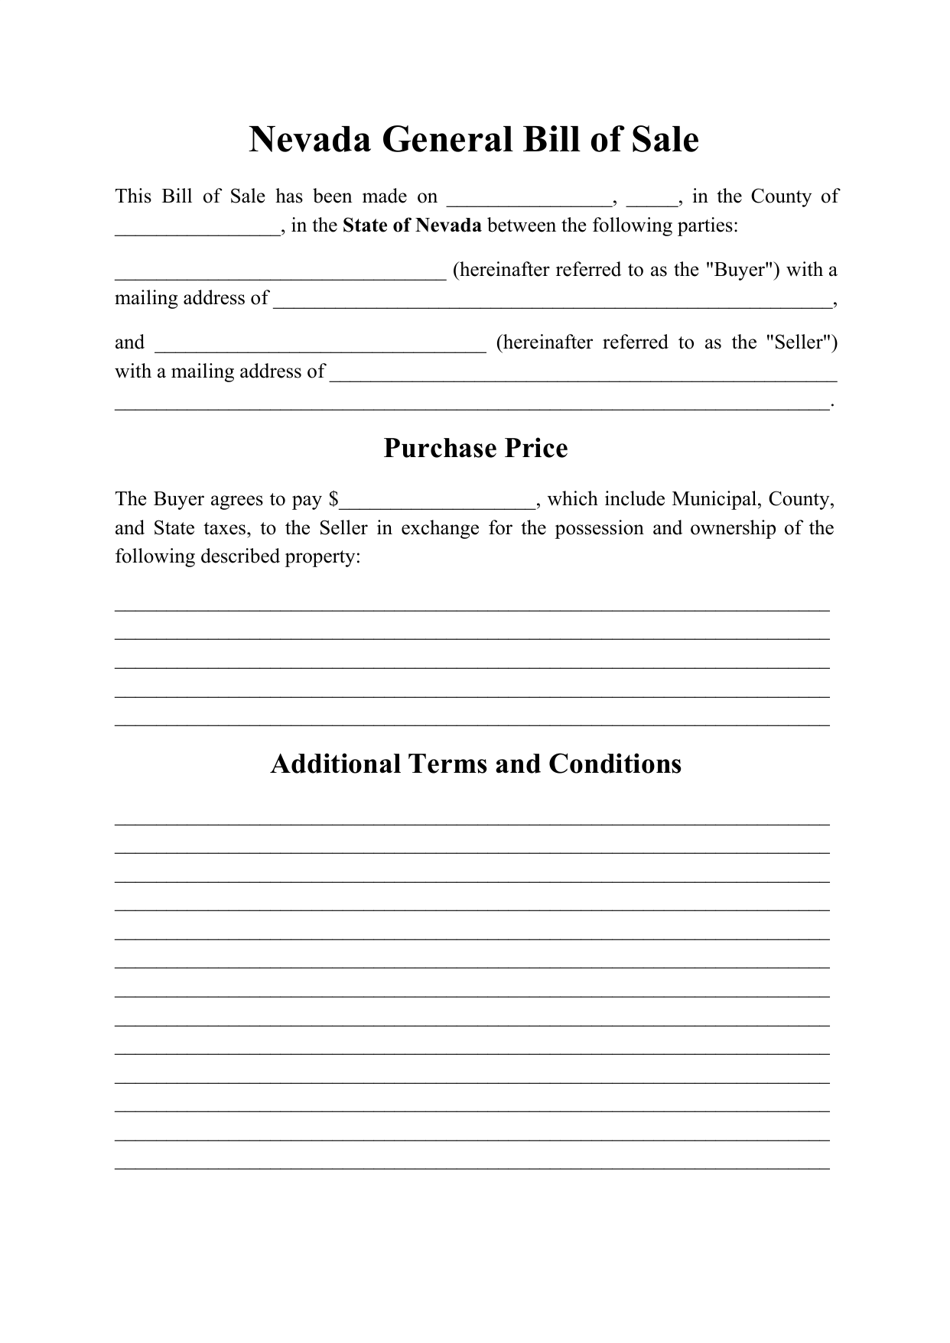 Generic Bill of Sale Form - Nevada, Page 1